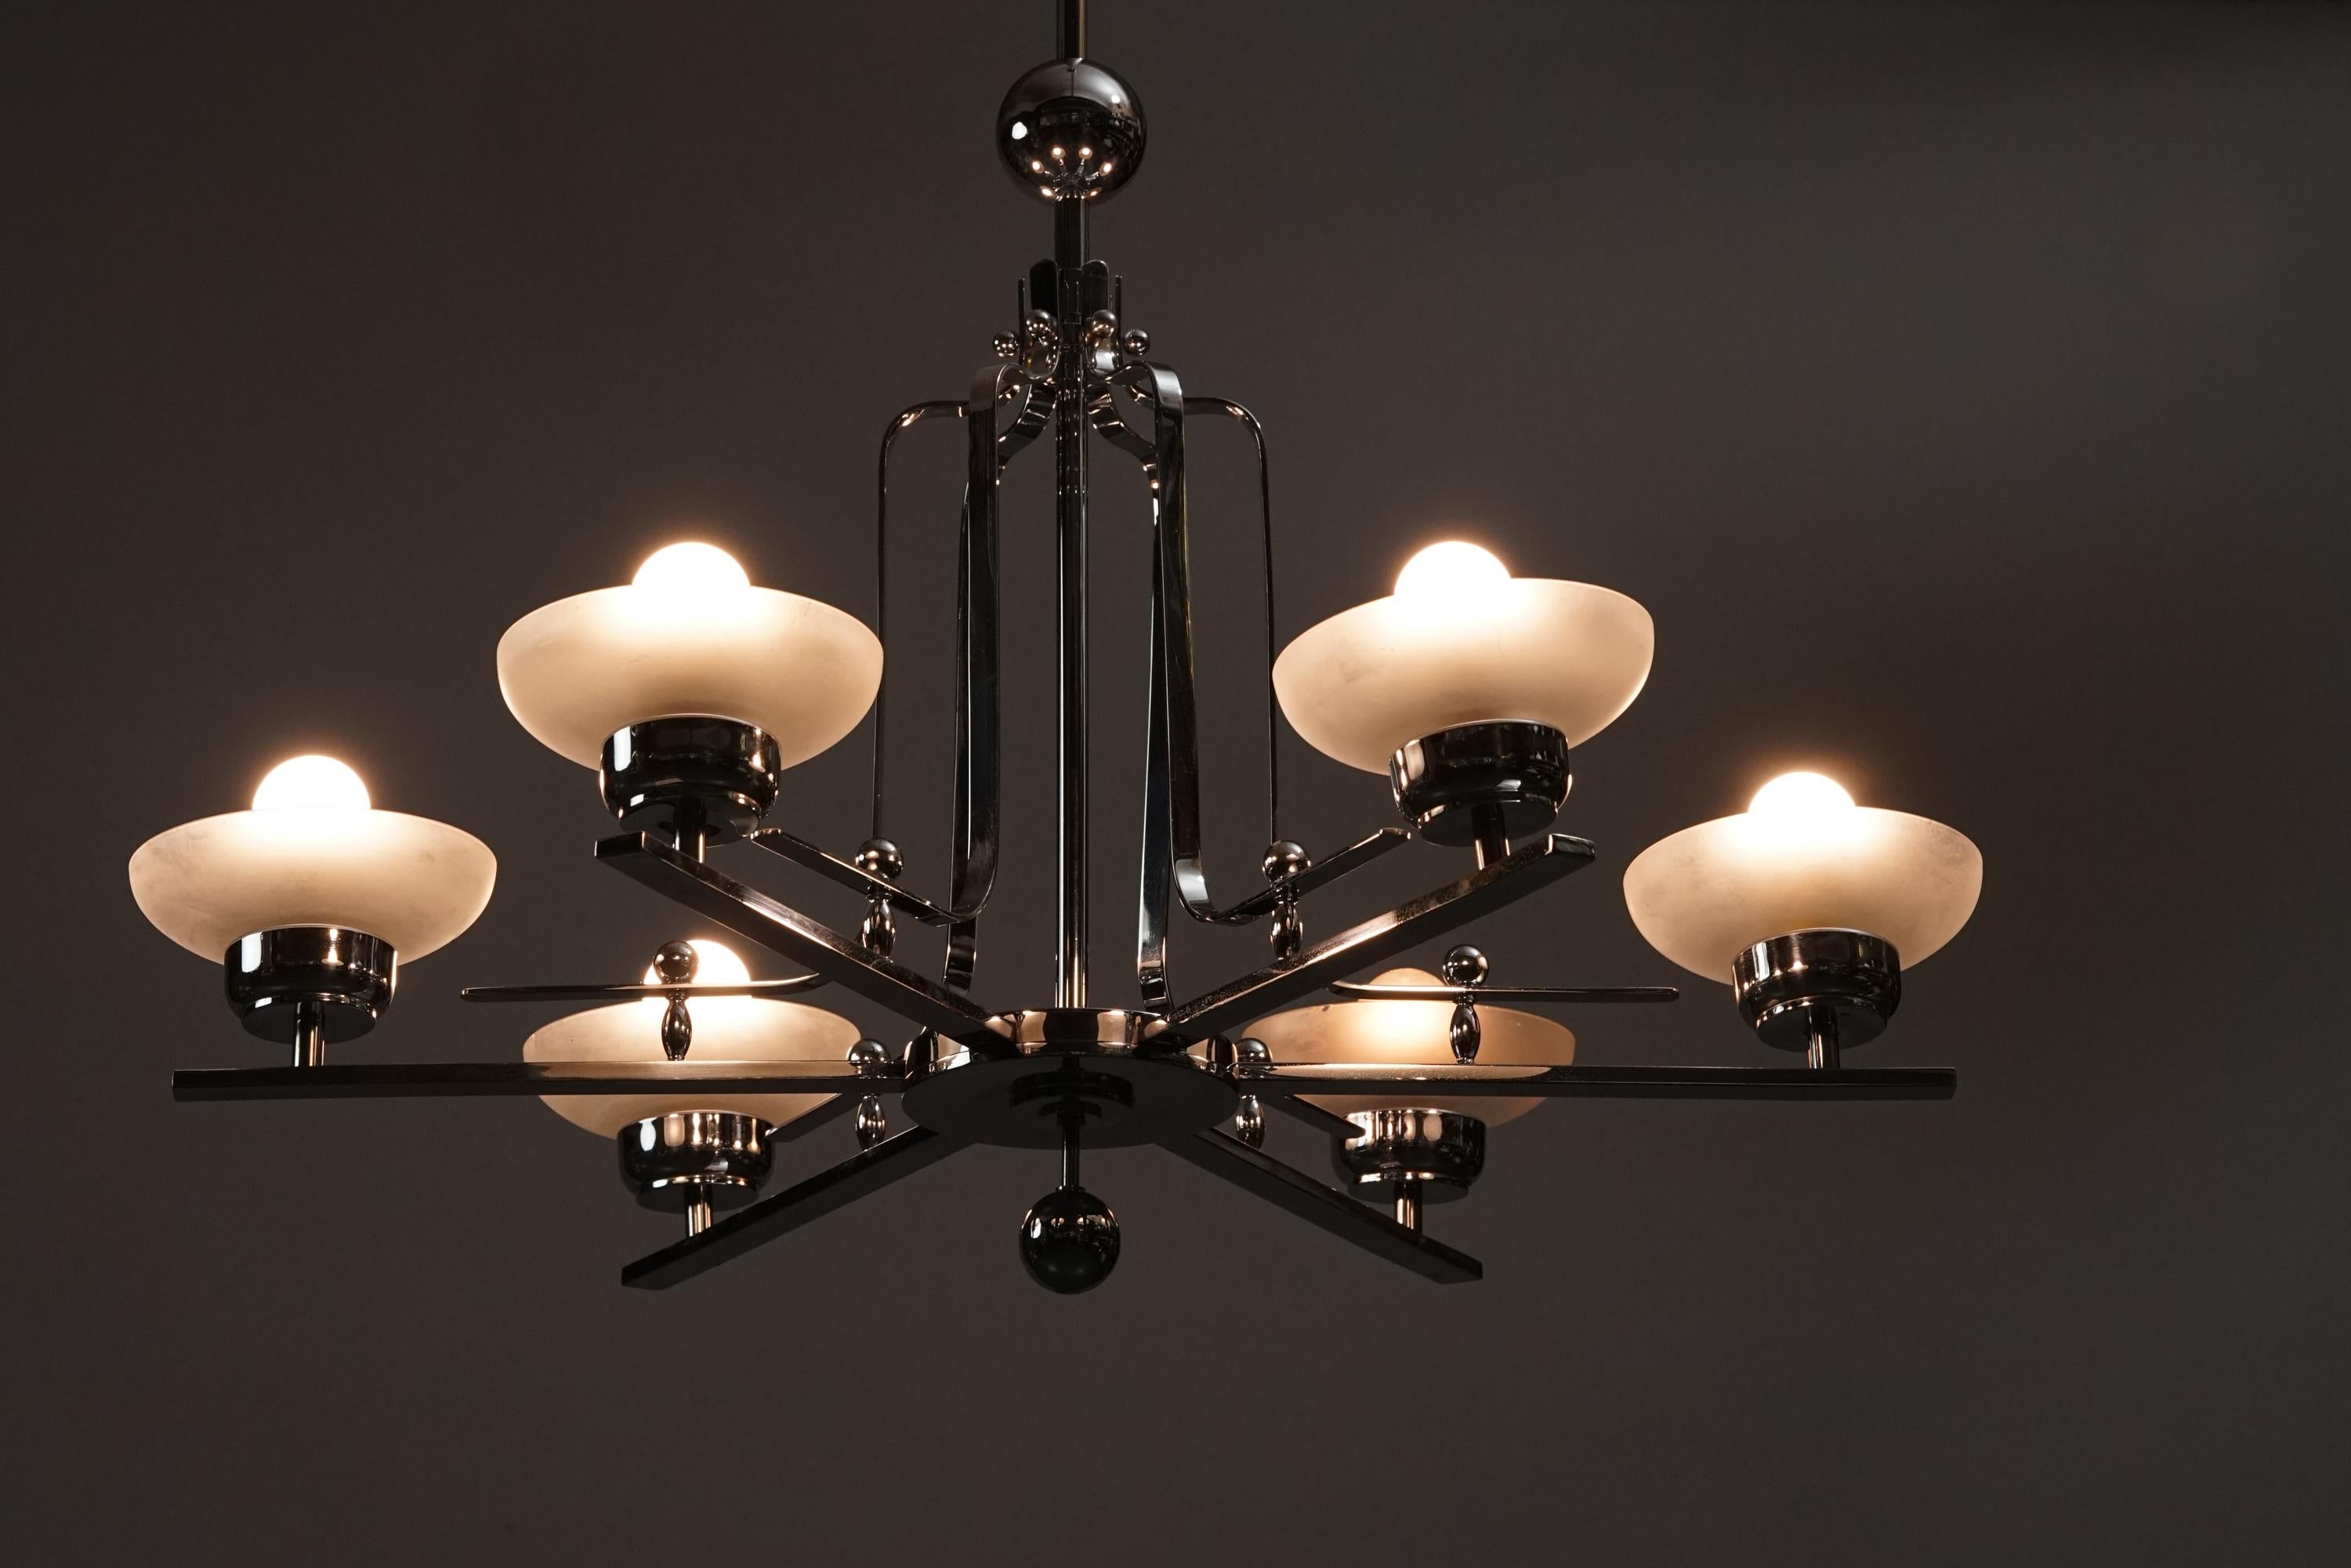 Paavo Tynell style rare chandelier from the early 1900s. Chromed metal frame with milk glass shades. Good vintage condition, minor wear and patina consistent with age and use. Beautiful Art Deco -style design.